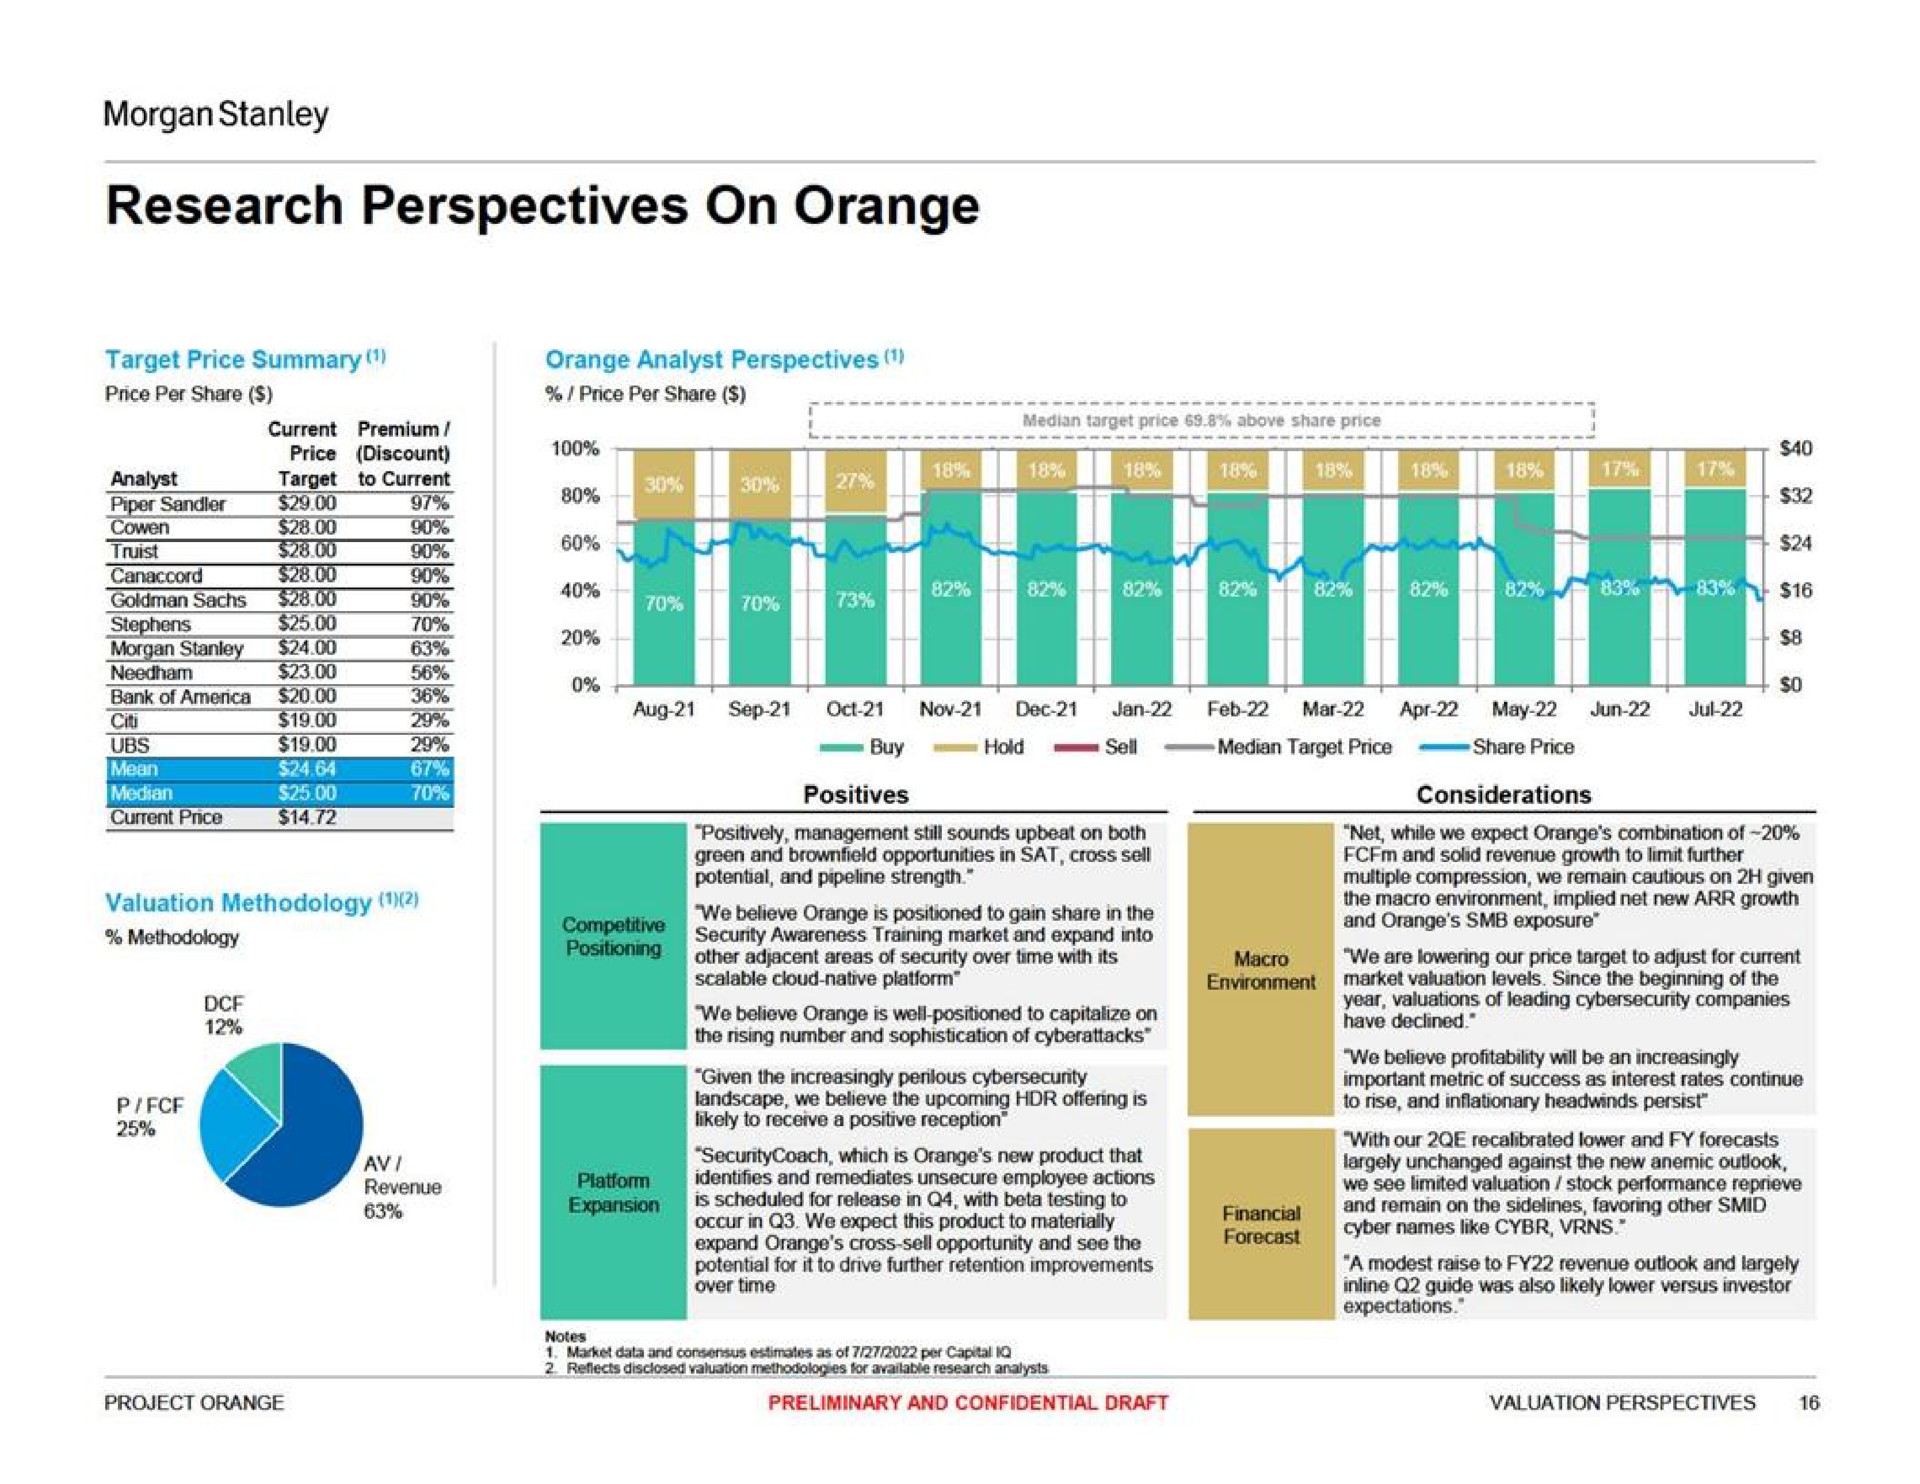 research perspectives on orange | Morgan Stanley